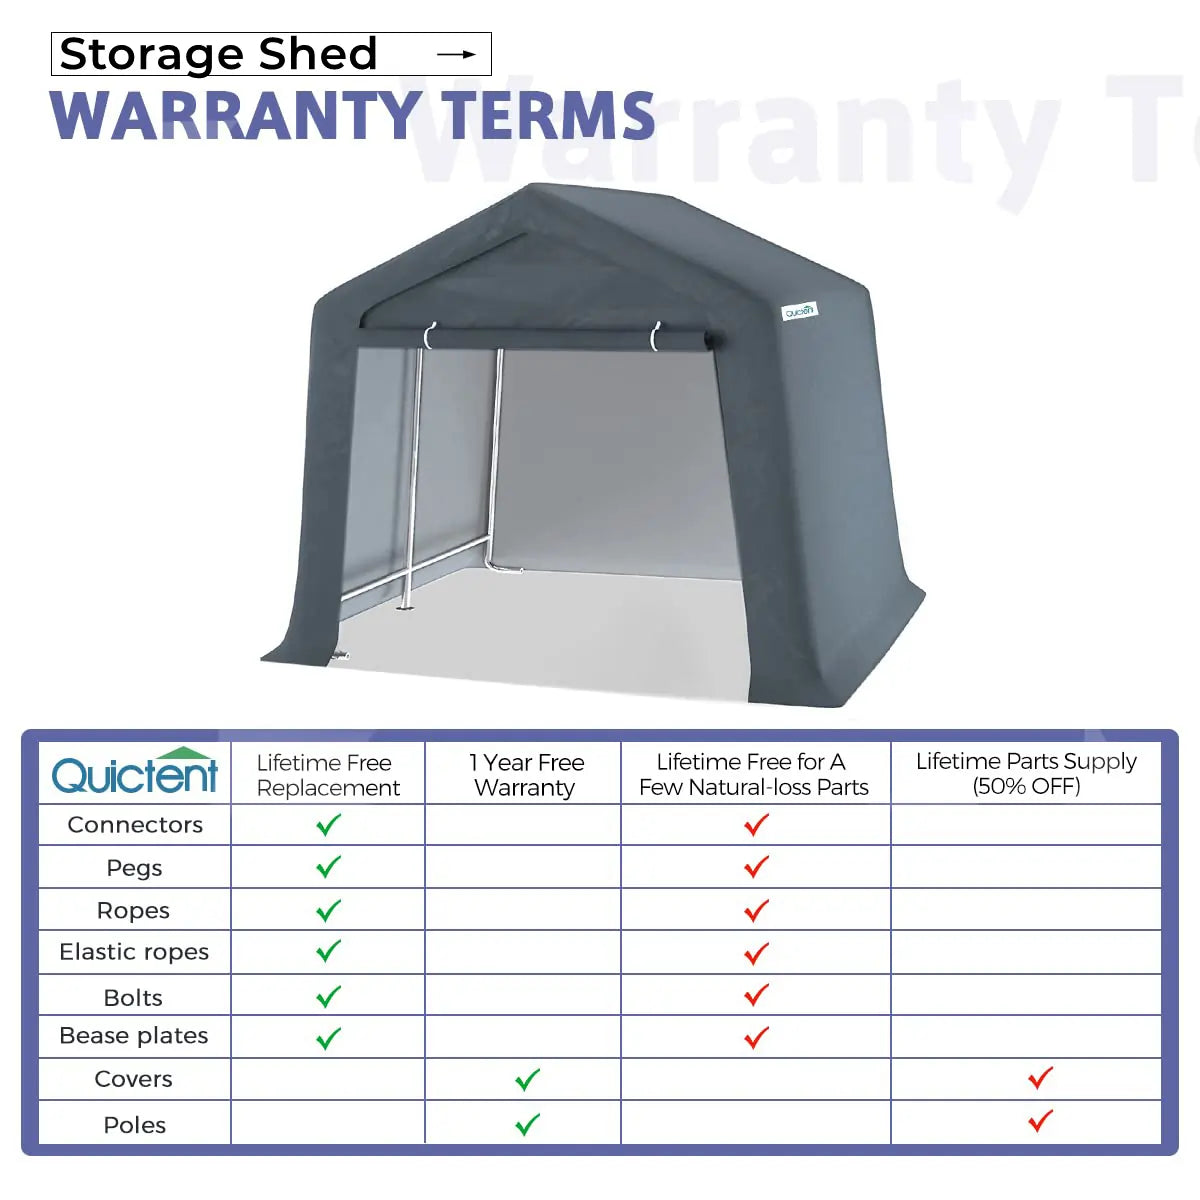 Warranty terms of 10x10 storage shed